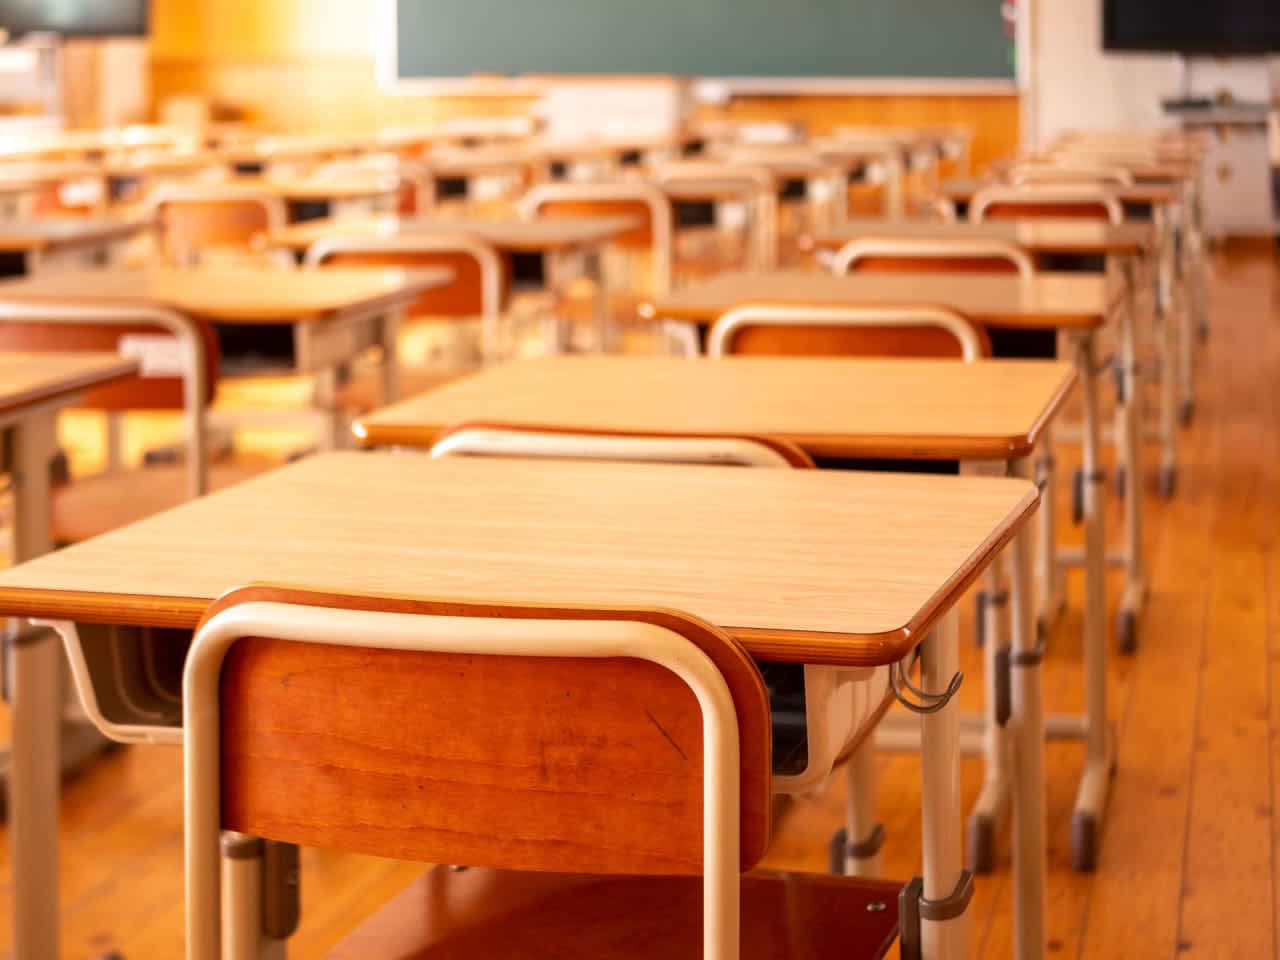 A dozen students and two teachers in Connecticut experienced watery eyes and scratchy throats after a classroom was contaminated with a defensive spray, school officials said.